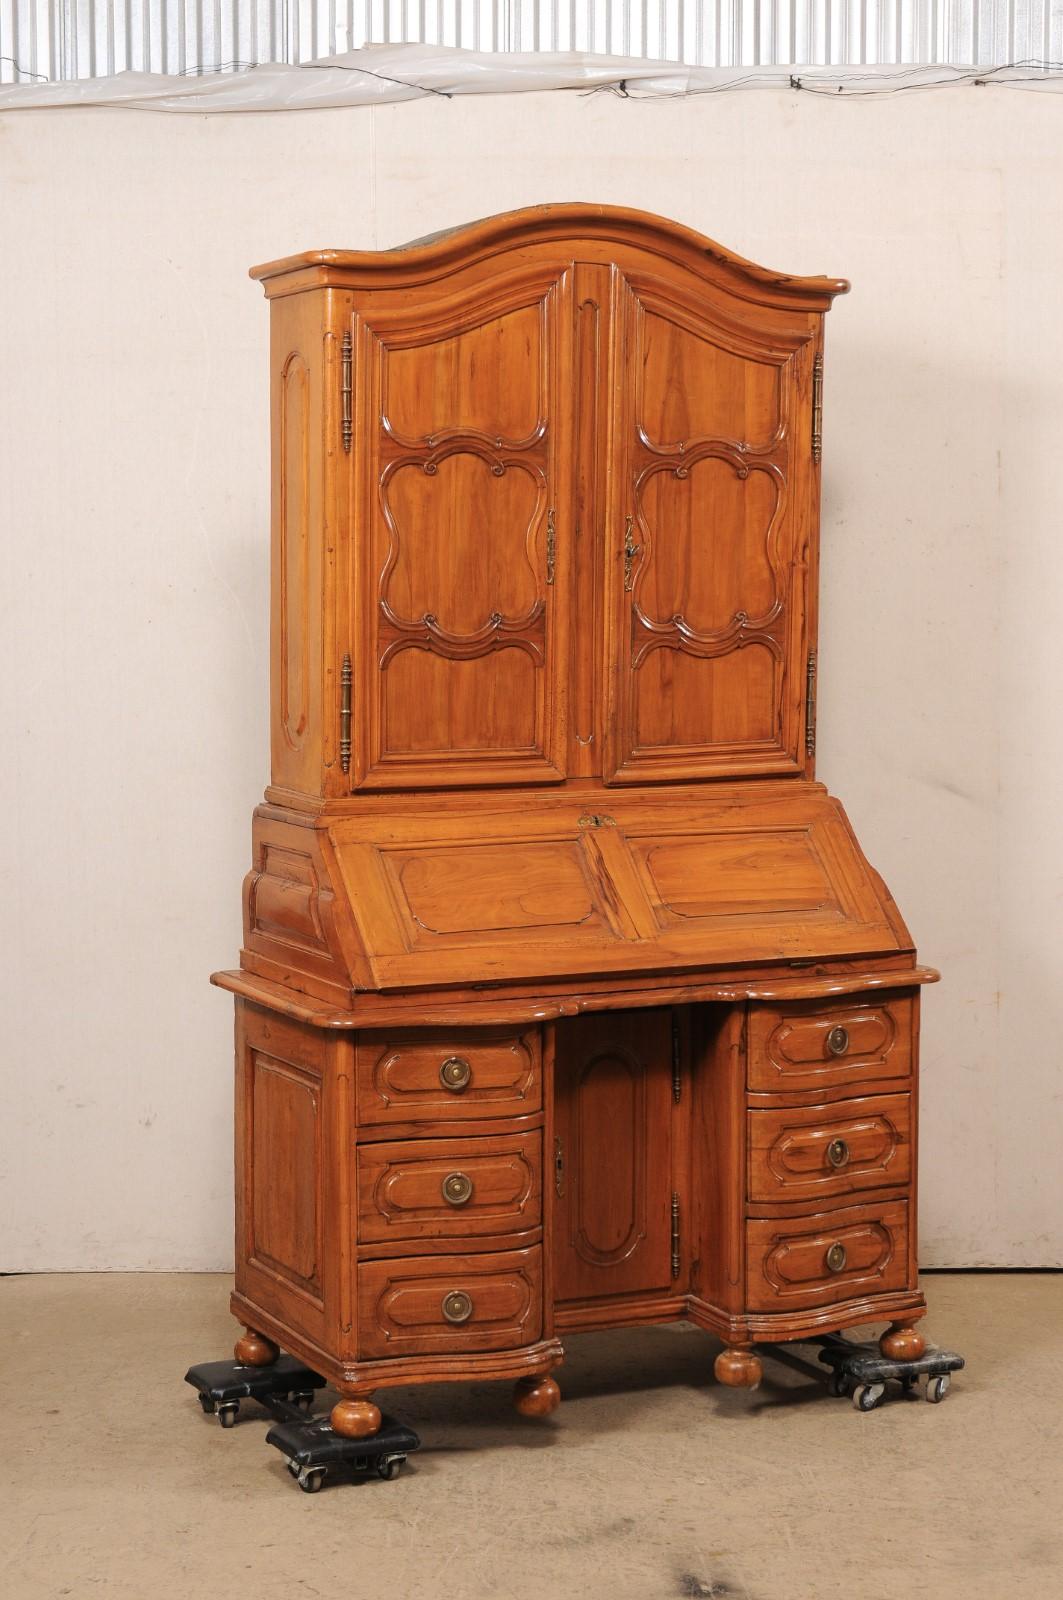 A beautiful French Louis XVI carved-cherry wood tall secretarie cabinet, with original leather on desk, from the 18th century. This antique 